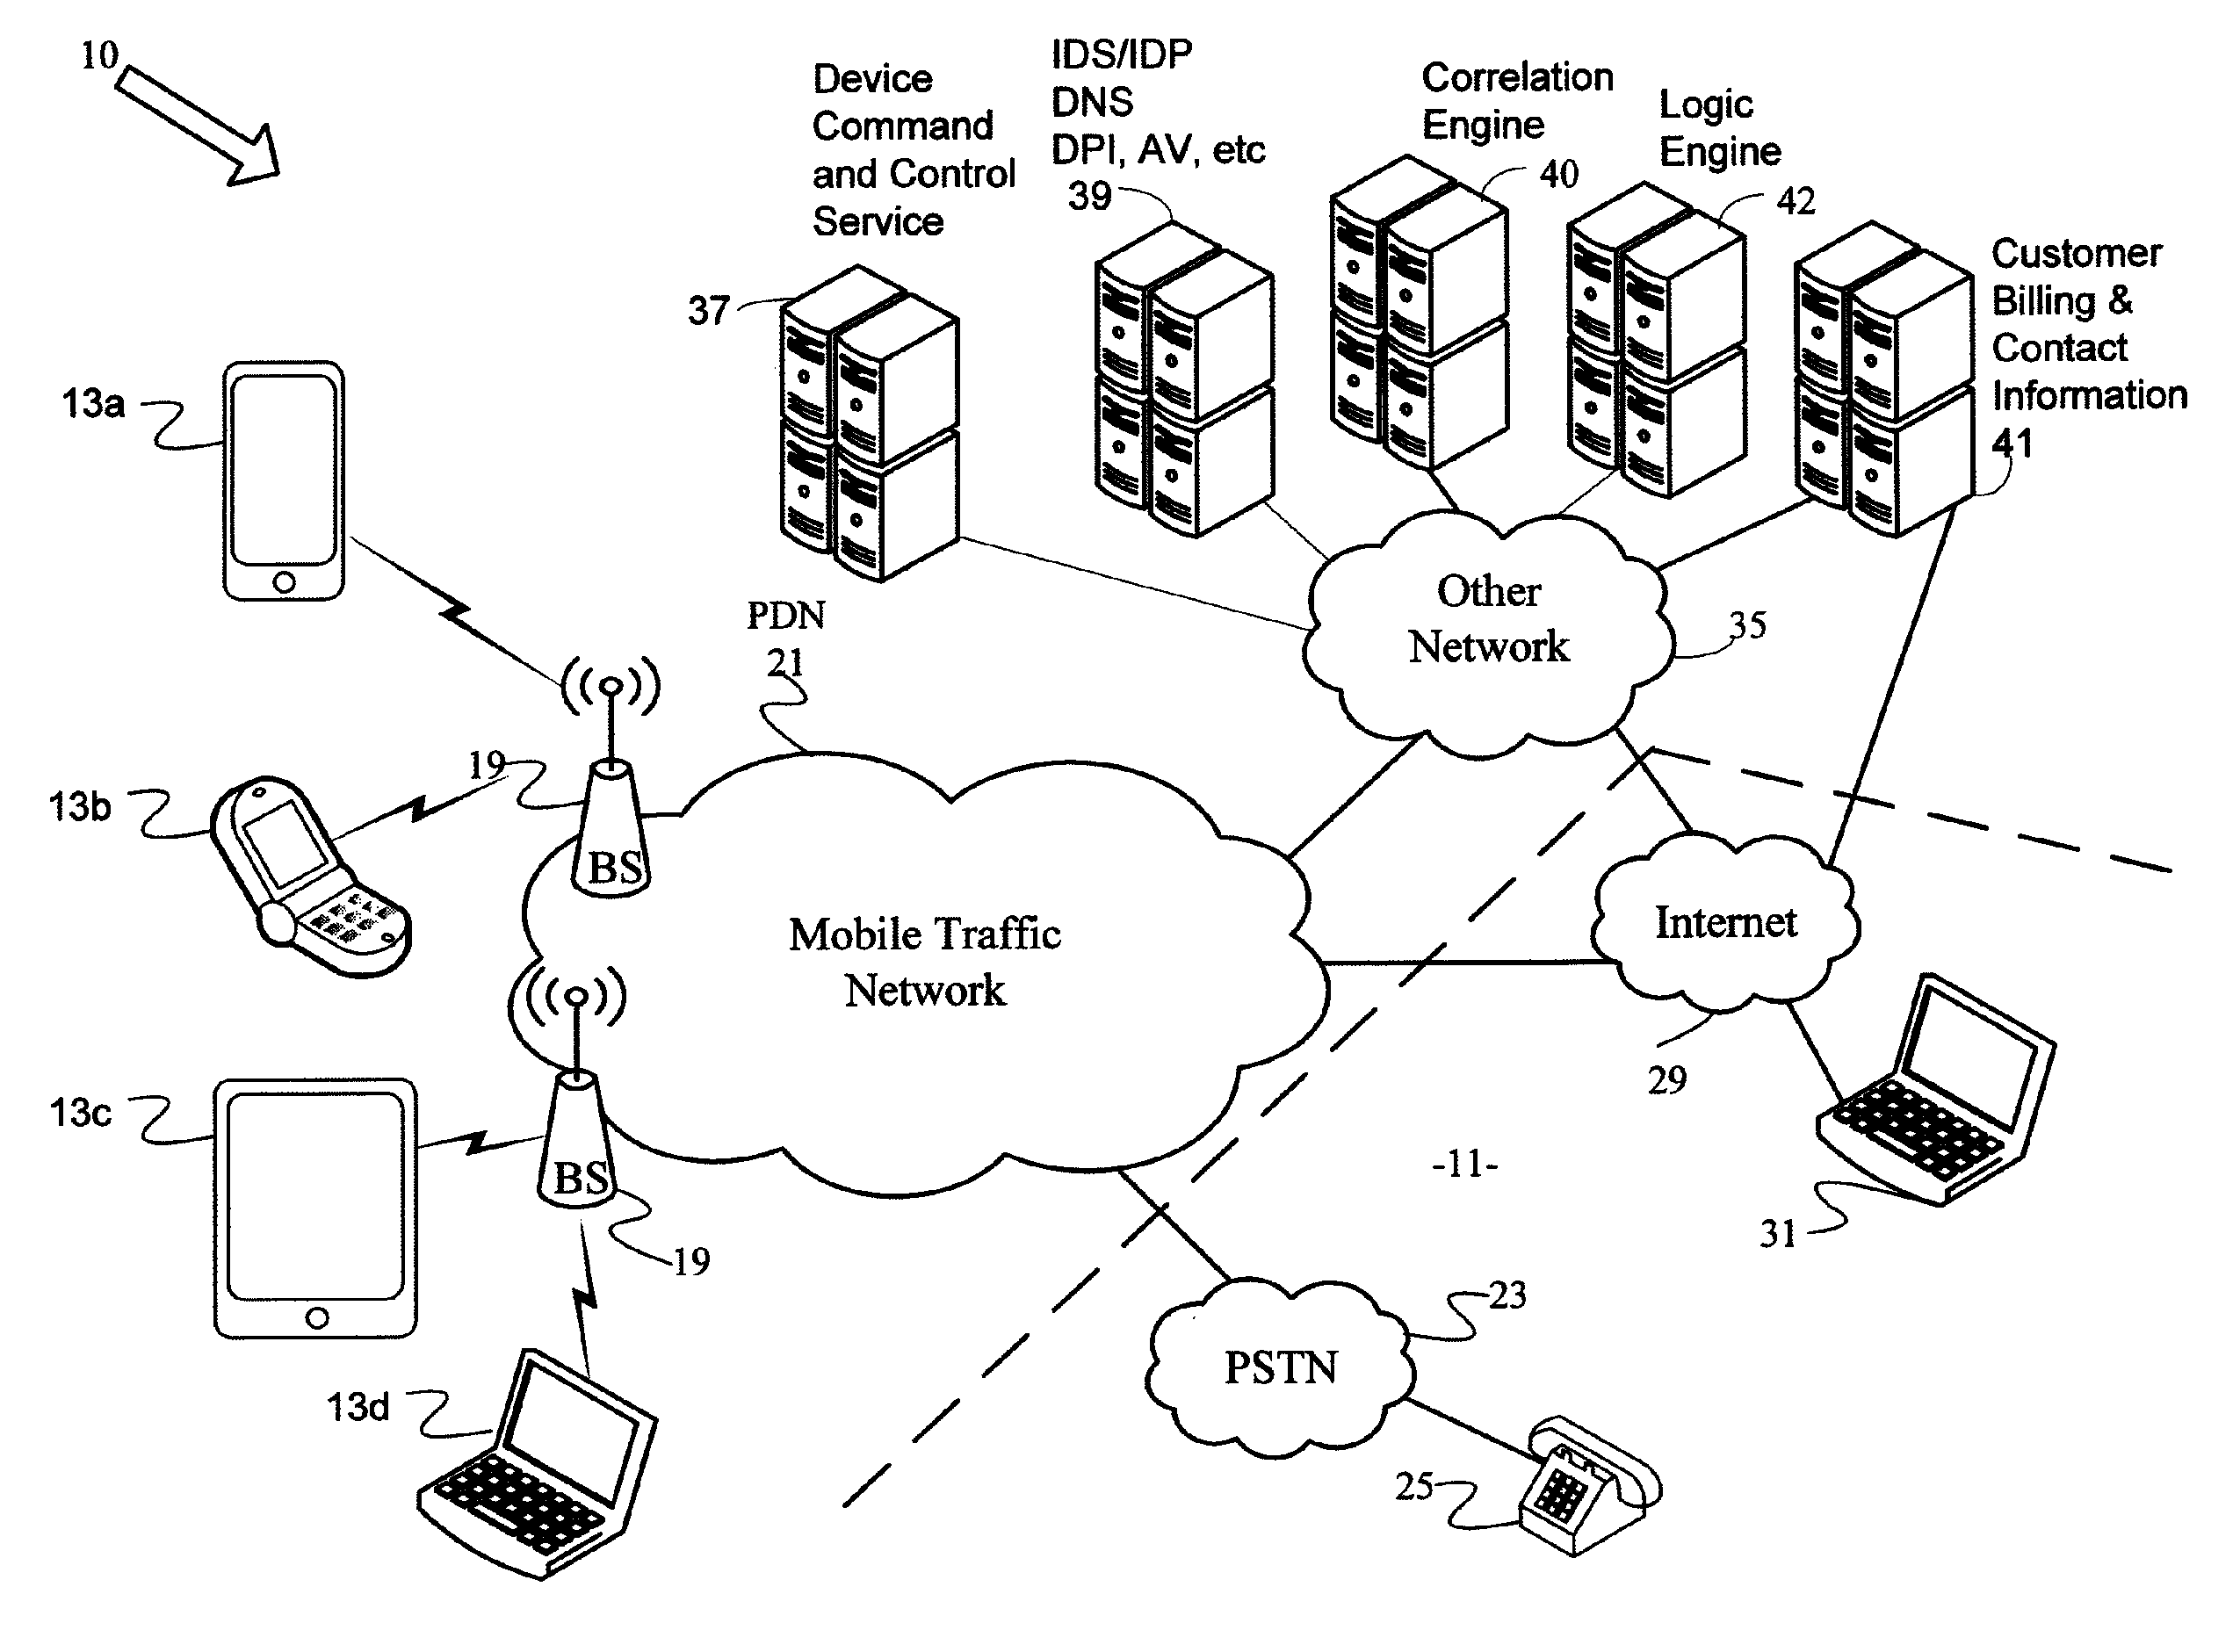 Network based device security and controls